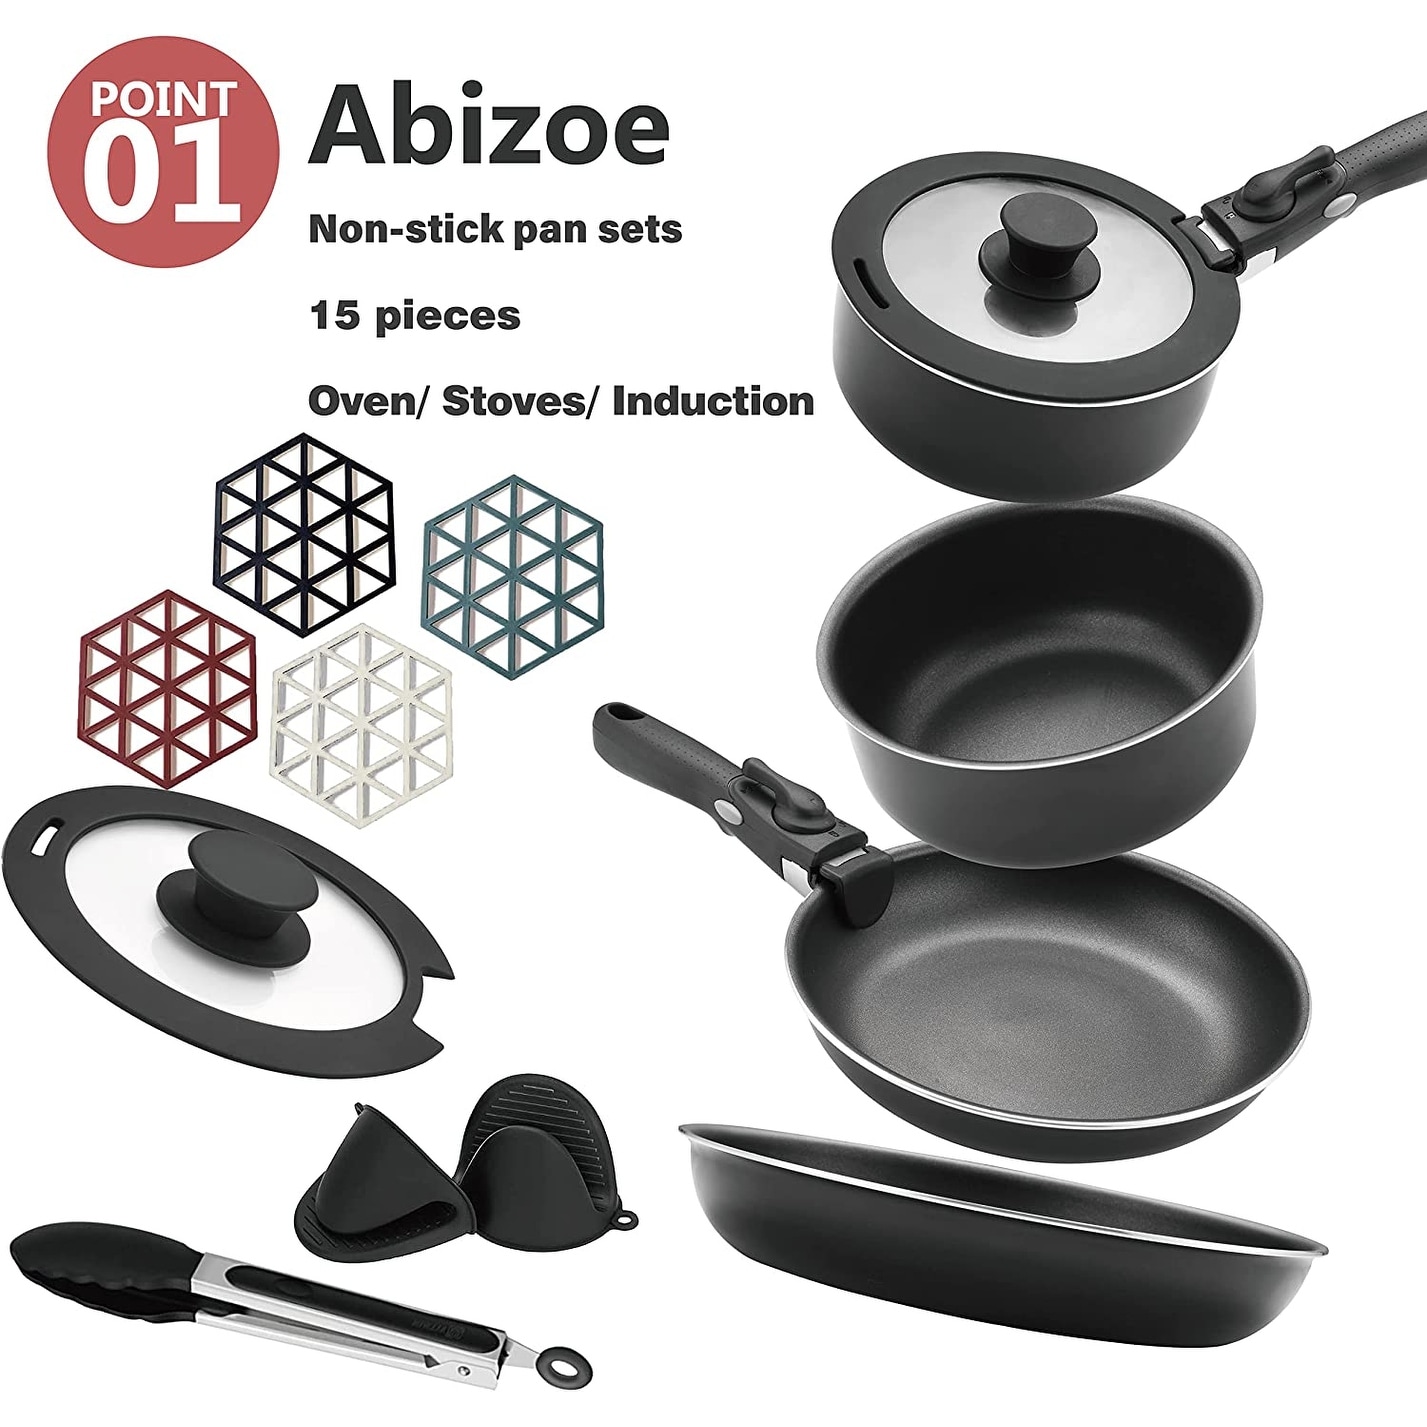 https://ak1.ostkcdn.com/images/products/is/images/direct/15c6df1bfdb1632e02c4e72a8b5bffb4f1fcab95/12-Piece-Non-Stick-Cookware-Set-Non-Stick-Pans-and-Pots-with-Removable-Handles.jpg